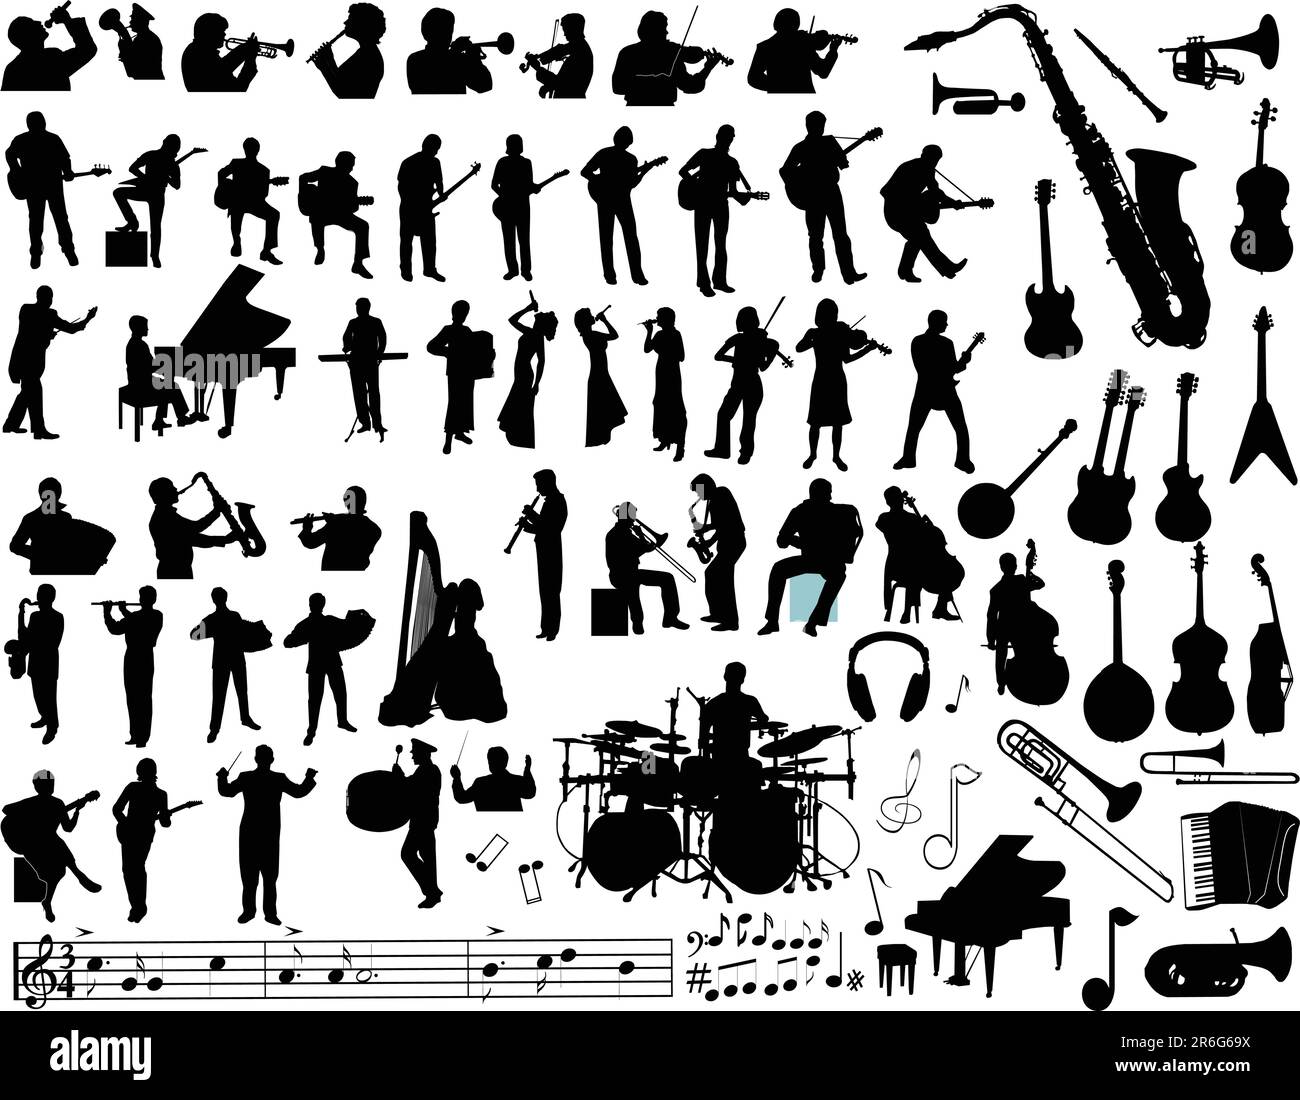 Vector Silhouettes Of Musicians Music Instruments And Symbols Stock